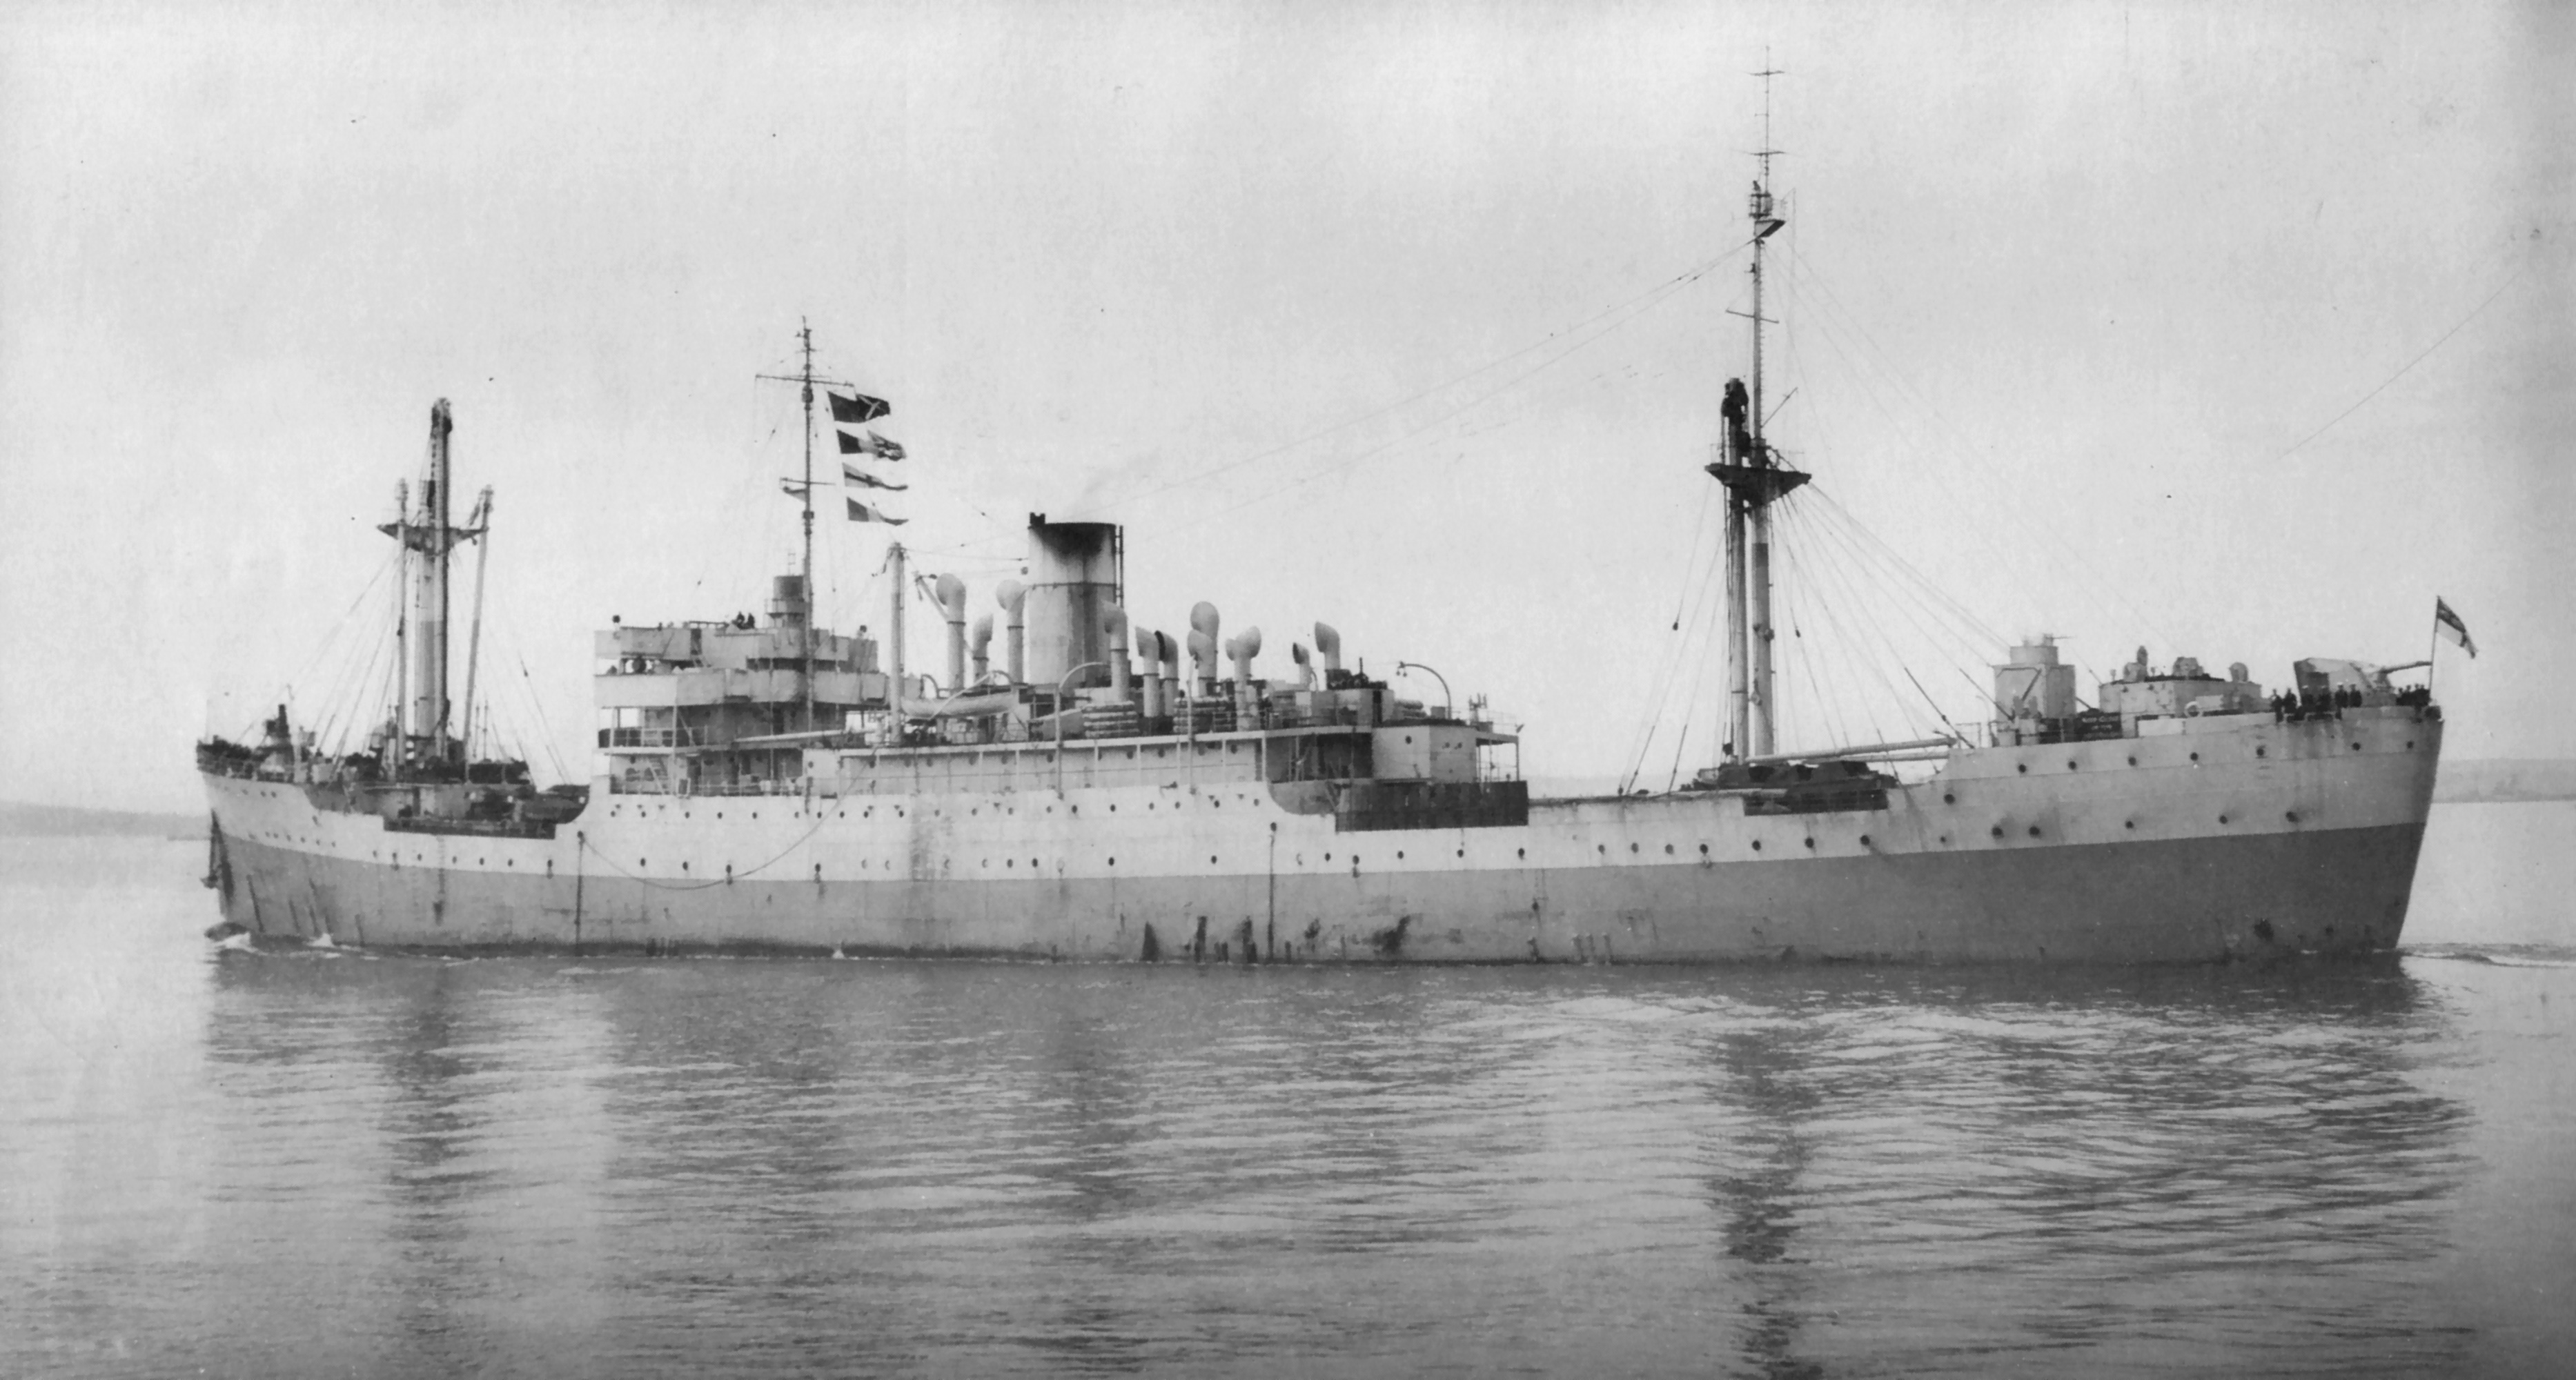 HMS AIRE in Hong Kong